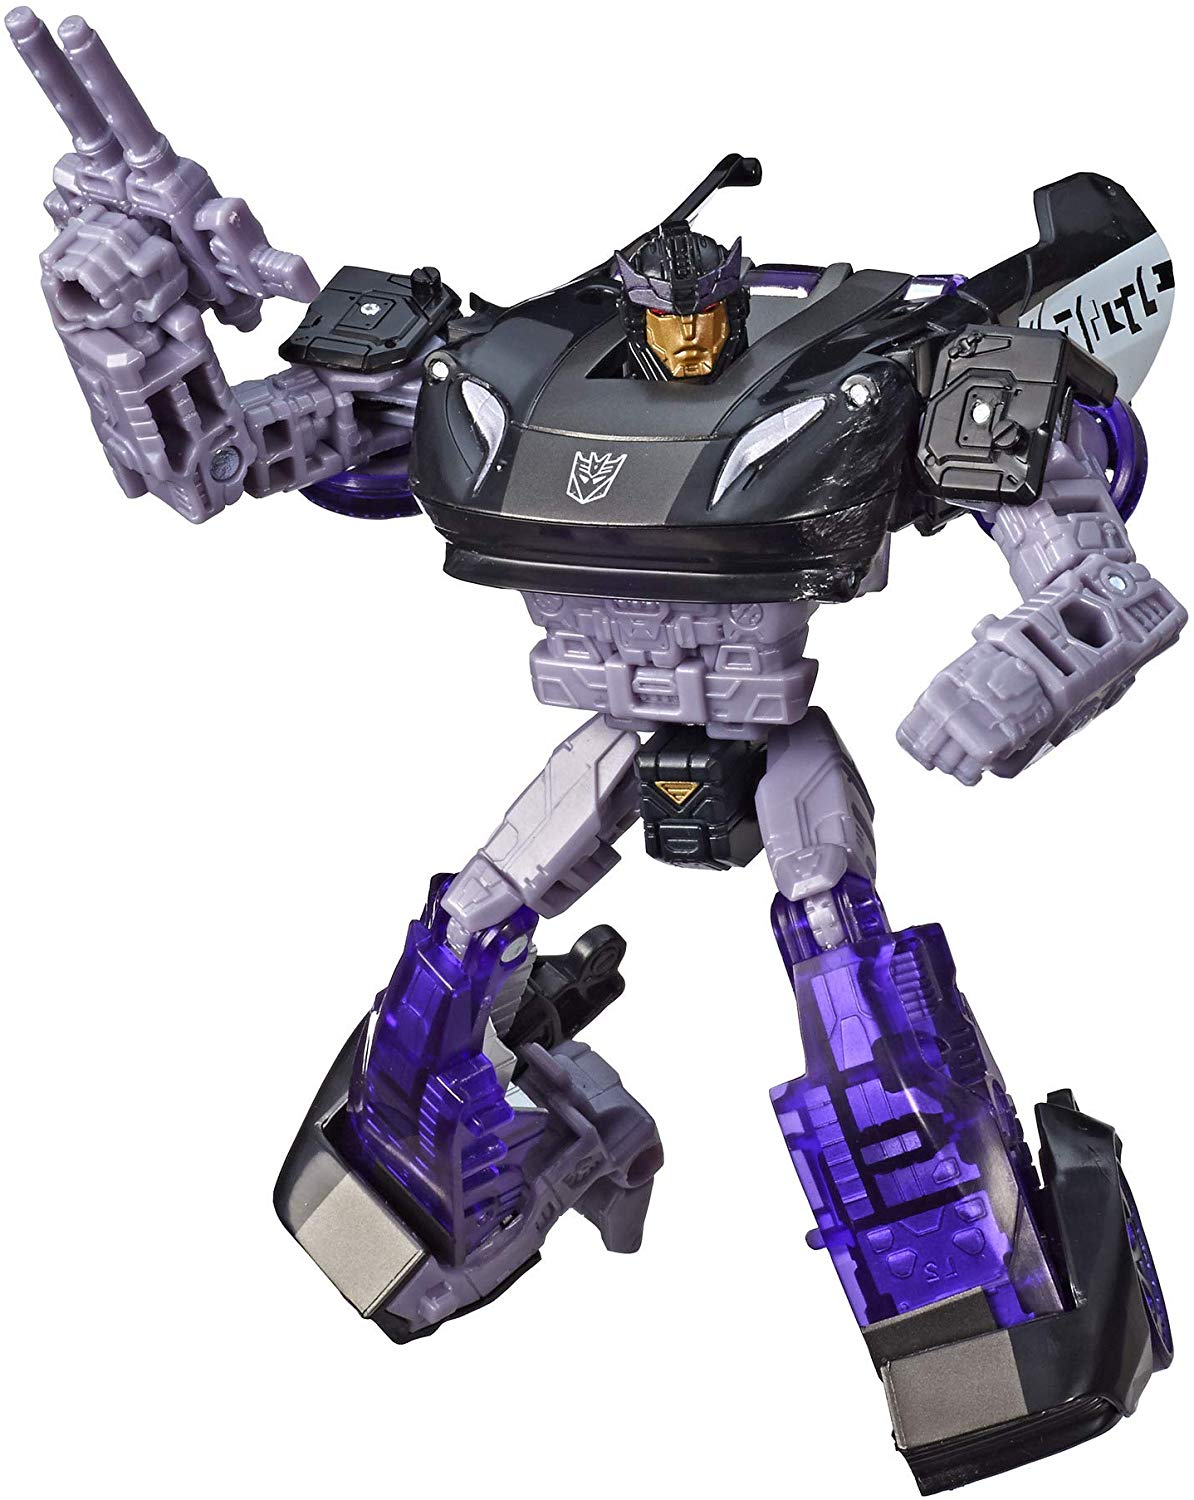 Transformers Generations War For Cybertron: Siege Deluxe Barricade Action Figure WFC-S41